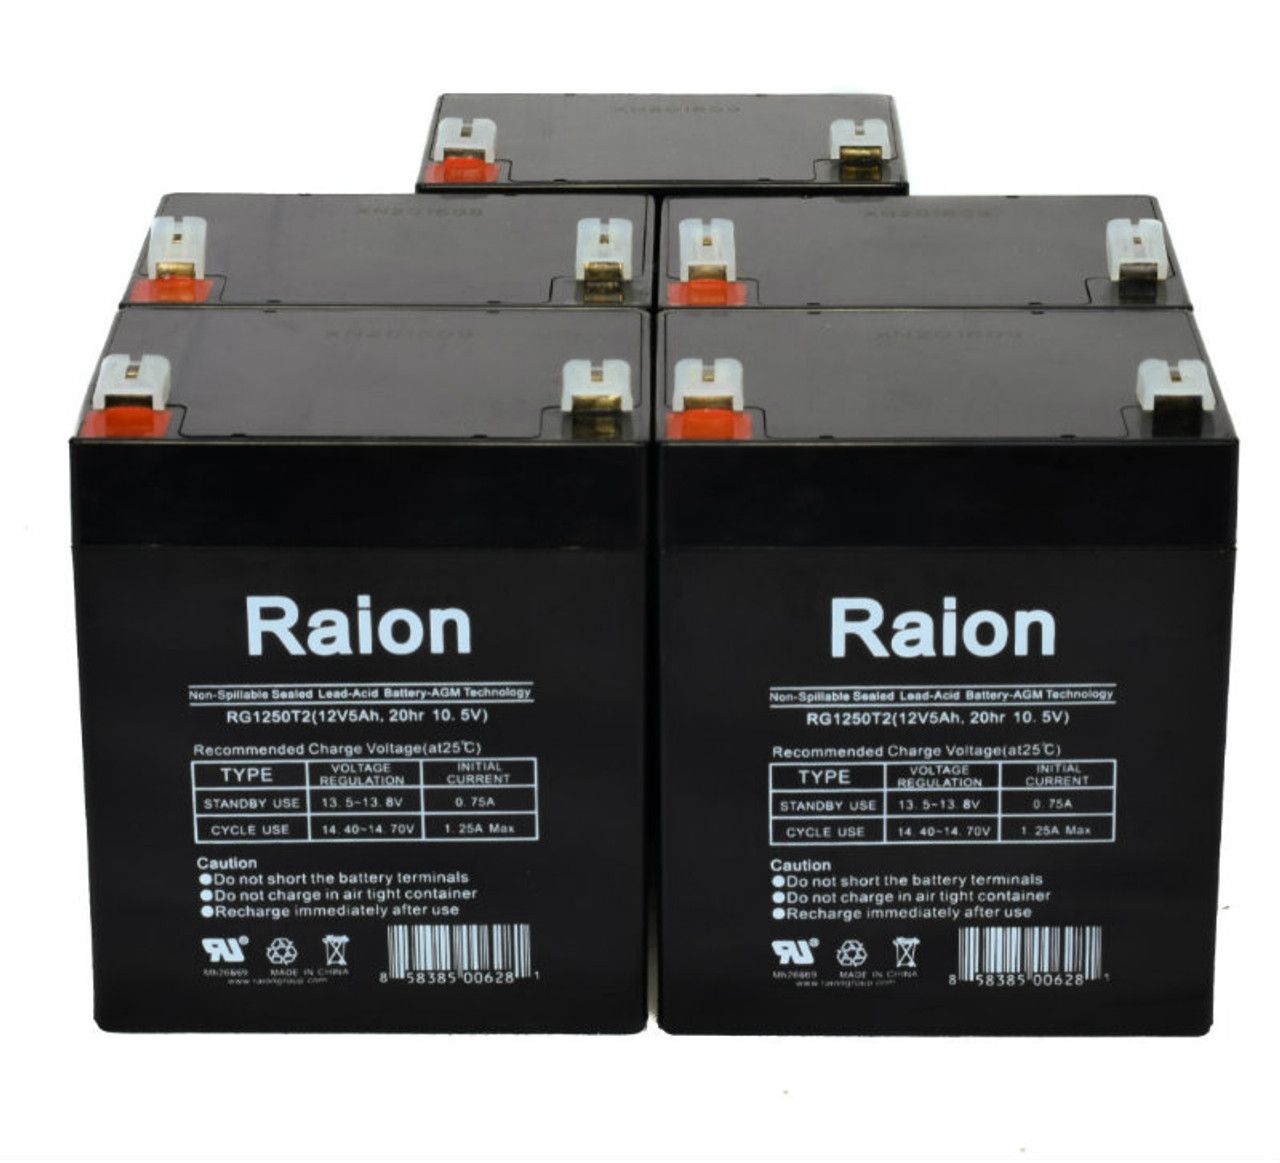 Raion Power RG1250T1 Replacement Battery for VCELL 12VC4.5 - (5 Pack)